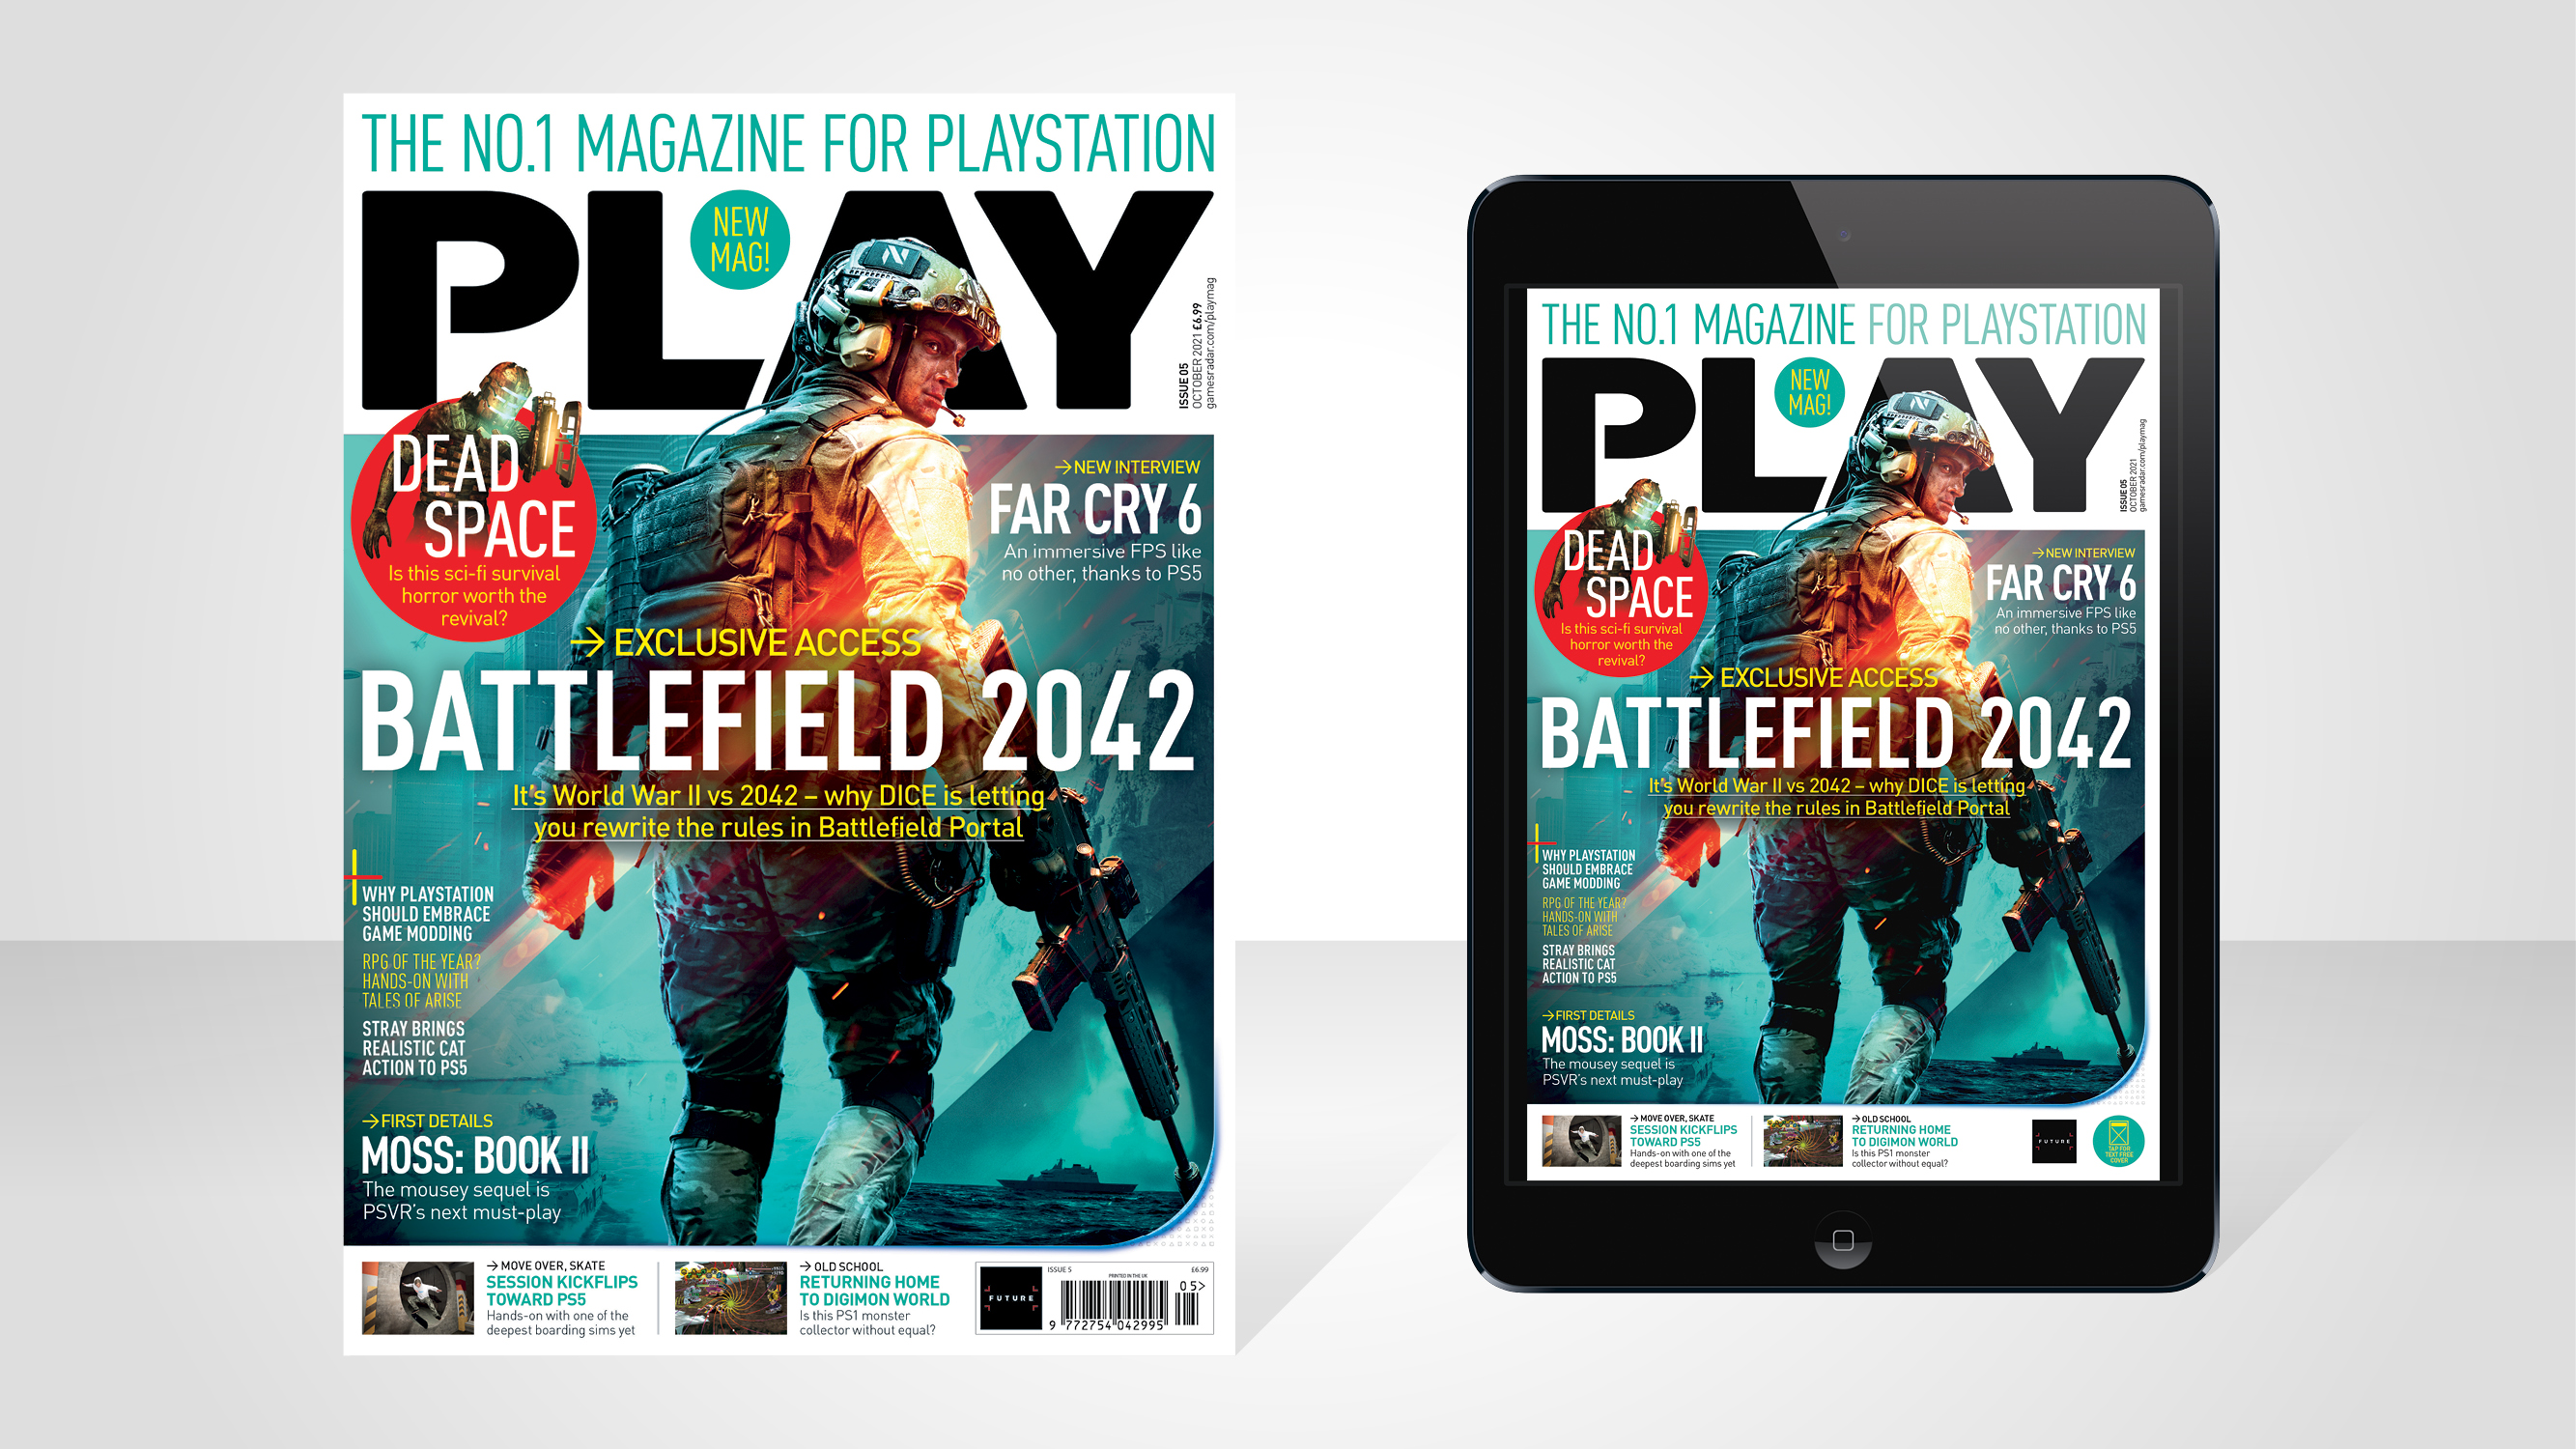 Battlefield Portal rewrites the rules on PLAY’s cover